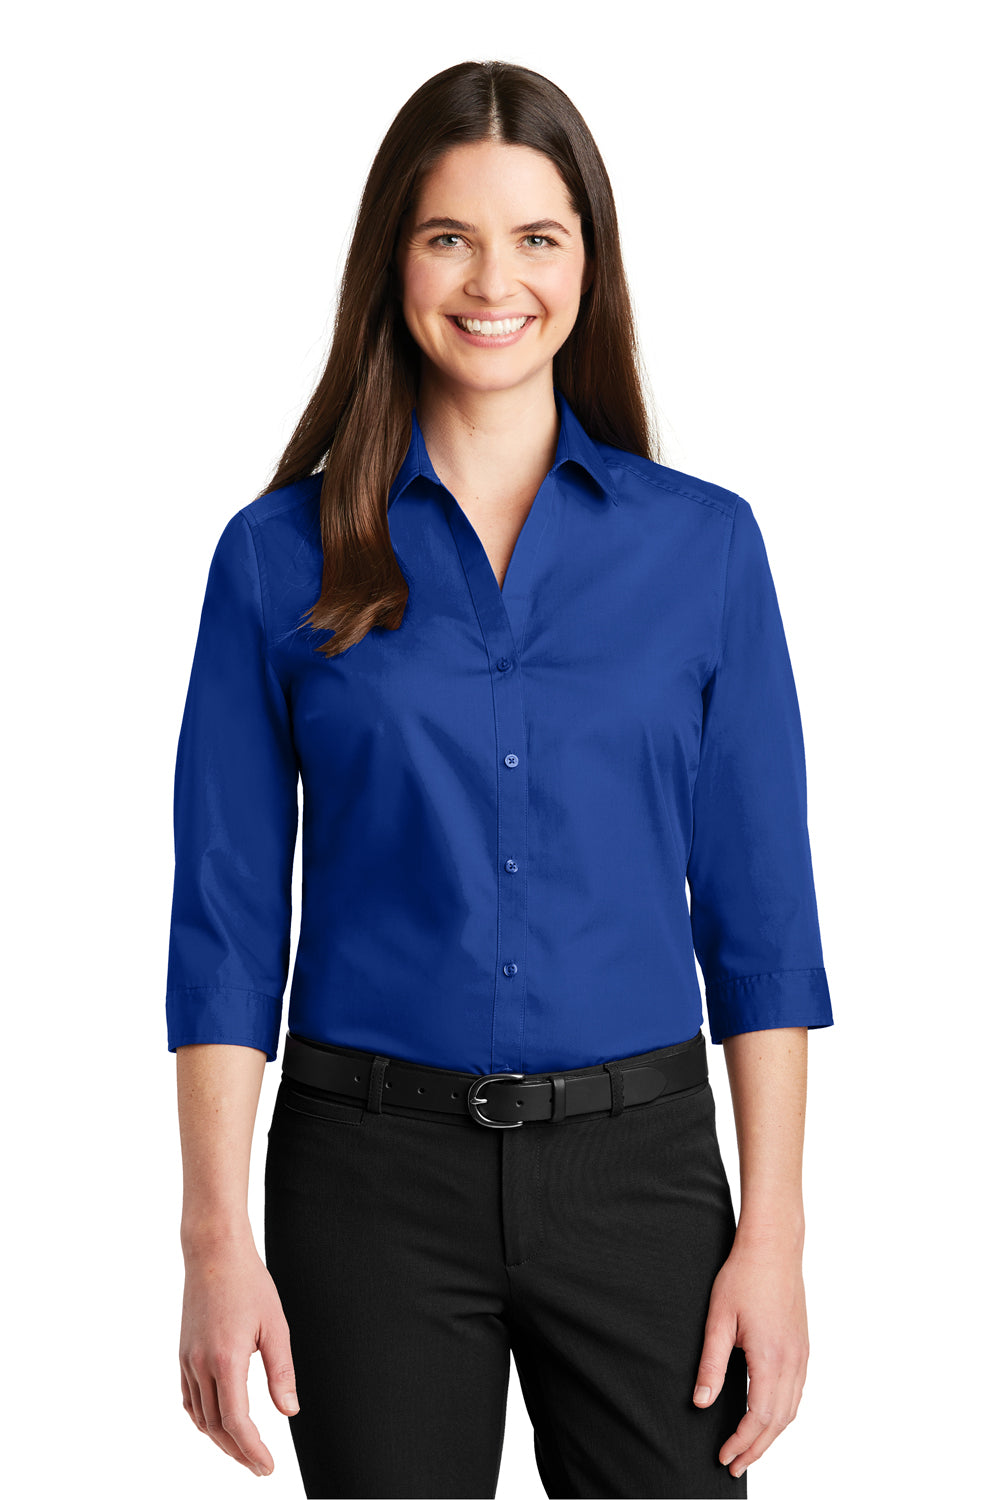 Port Authority LW102 Womens Carefree Stain Resistant 3/4 Sleeve Button Down Shirt Royal Blue Front